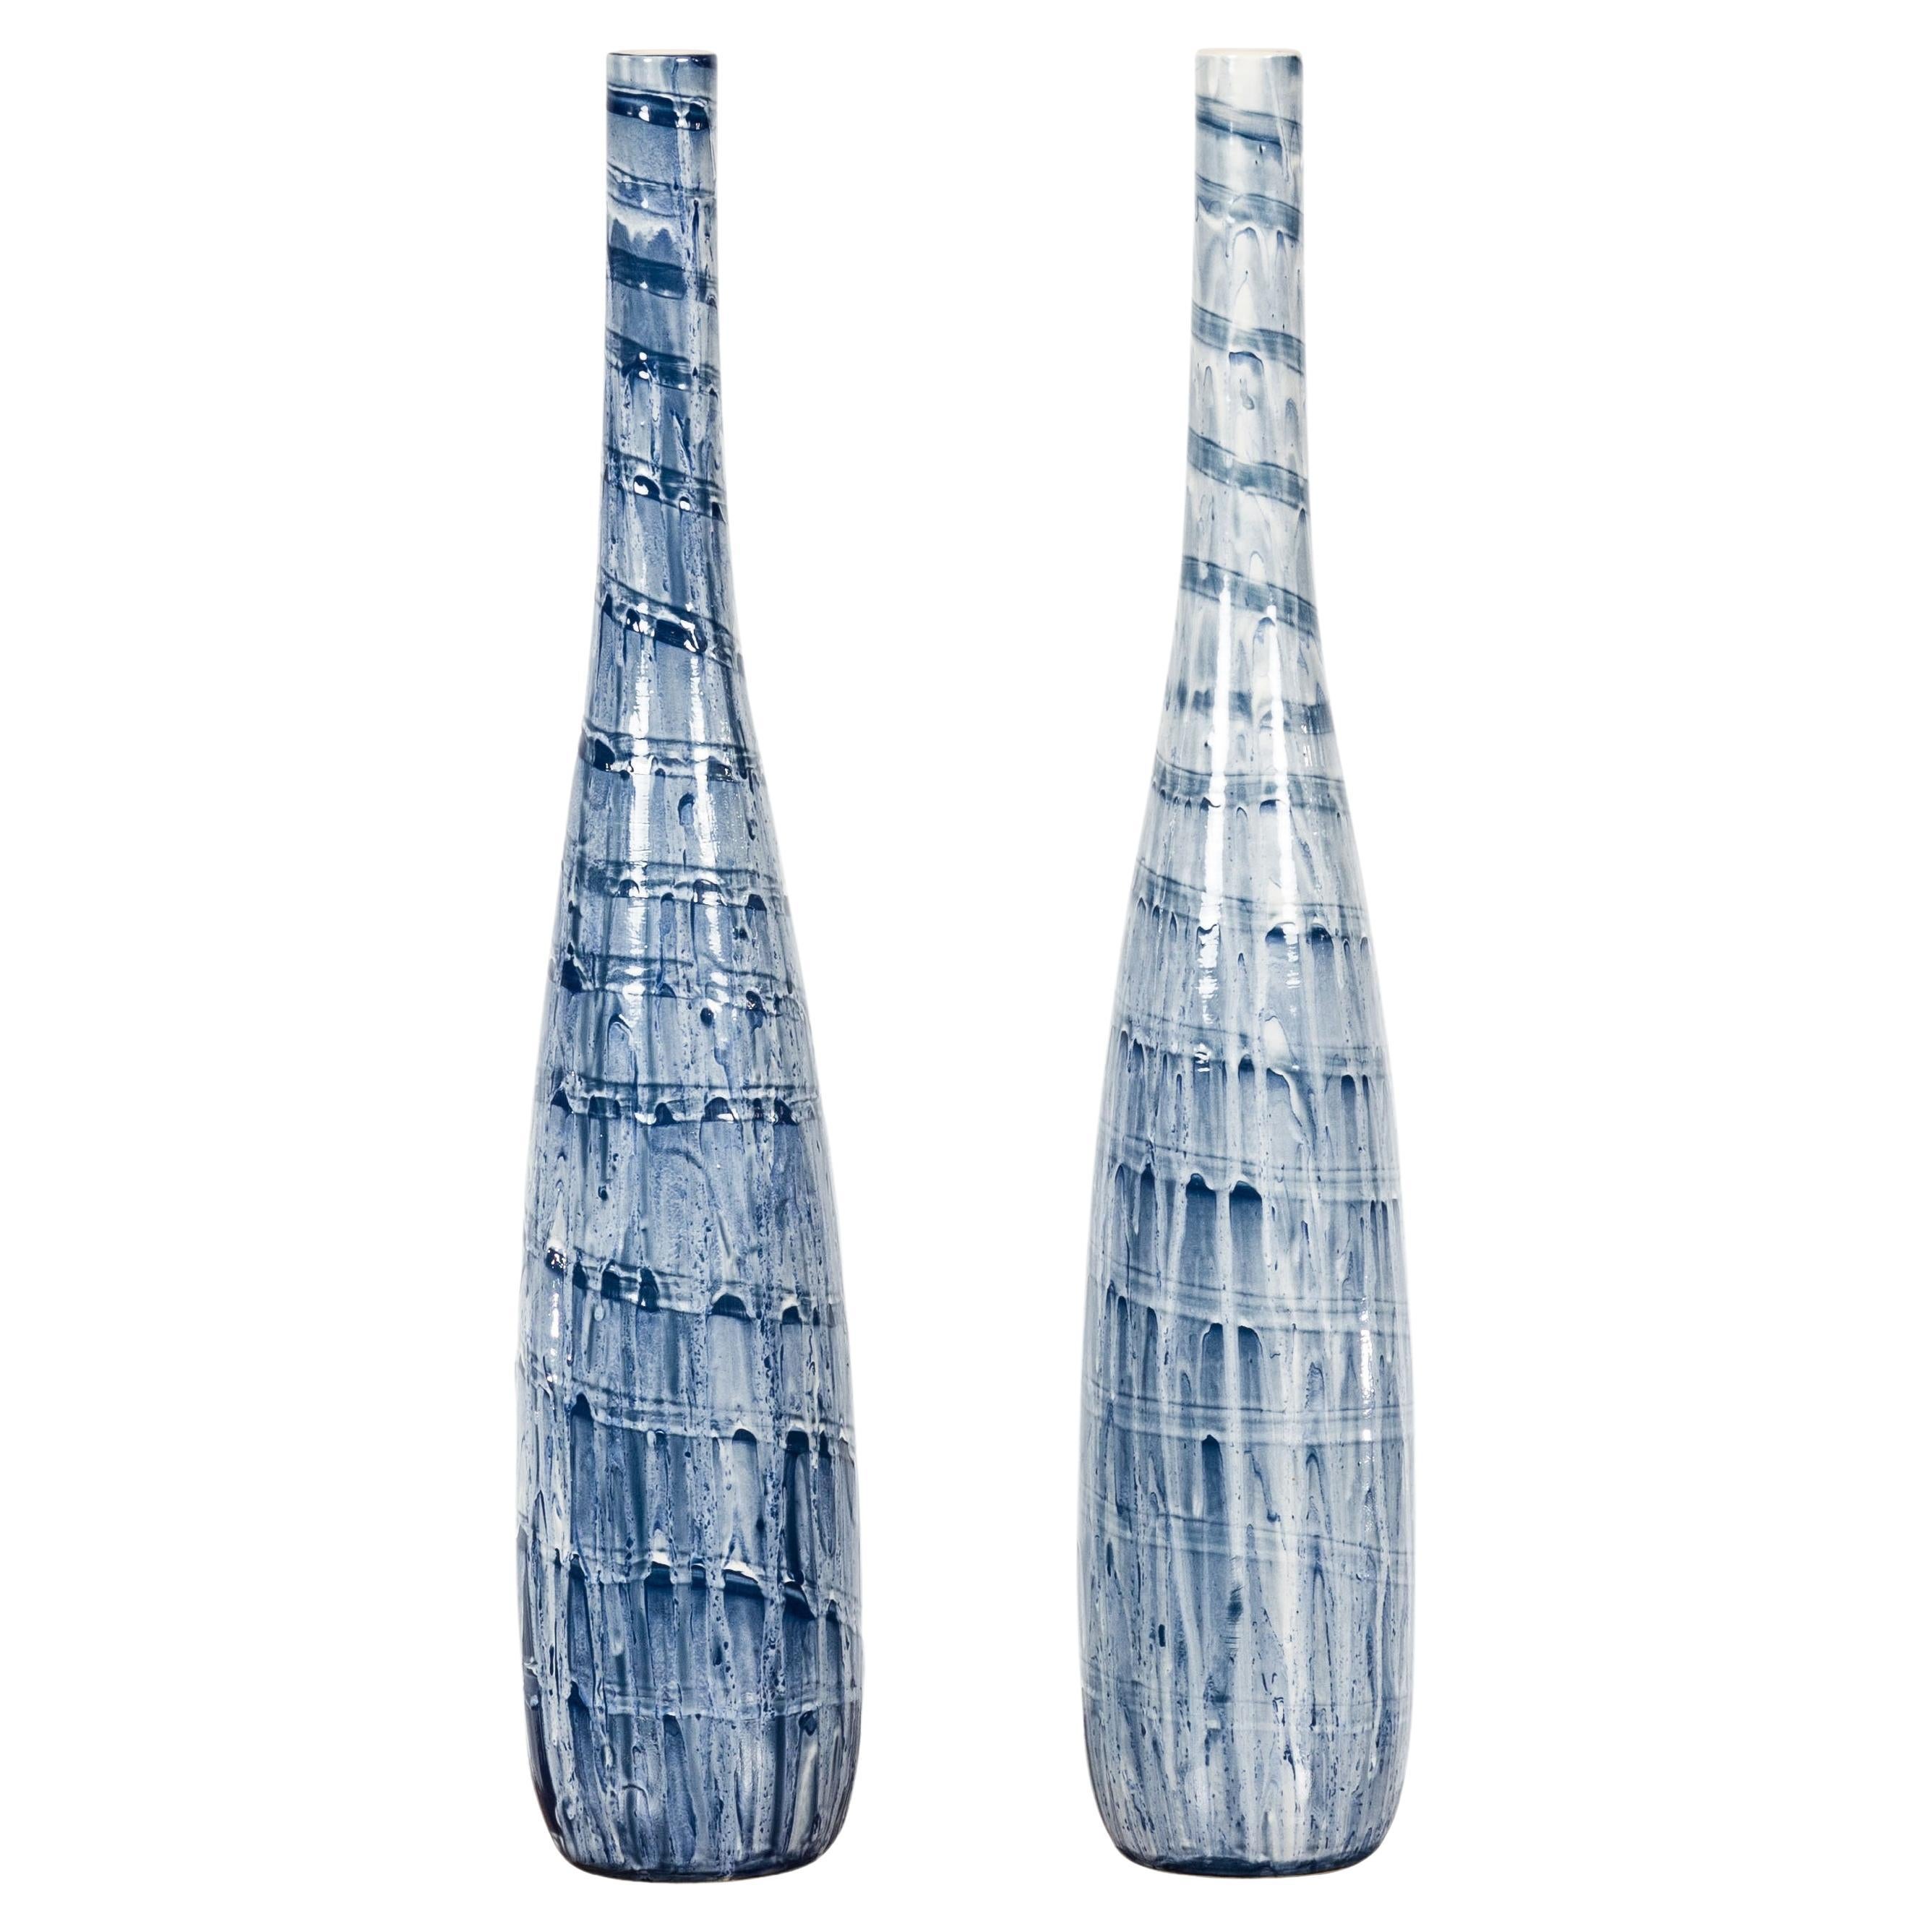 Slender Blue Vase with Spiraling and Dripping Décor, Two Sold Each 